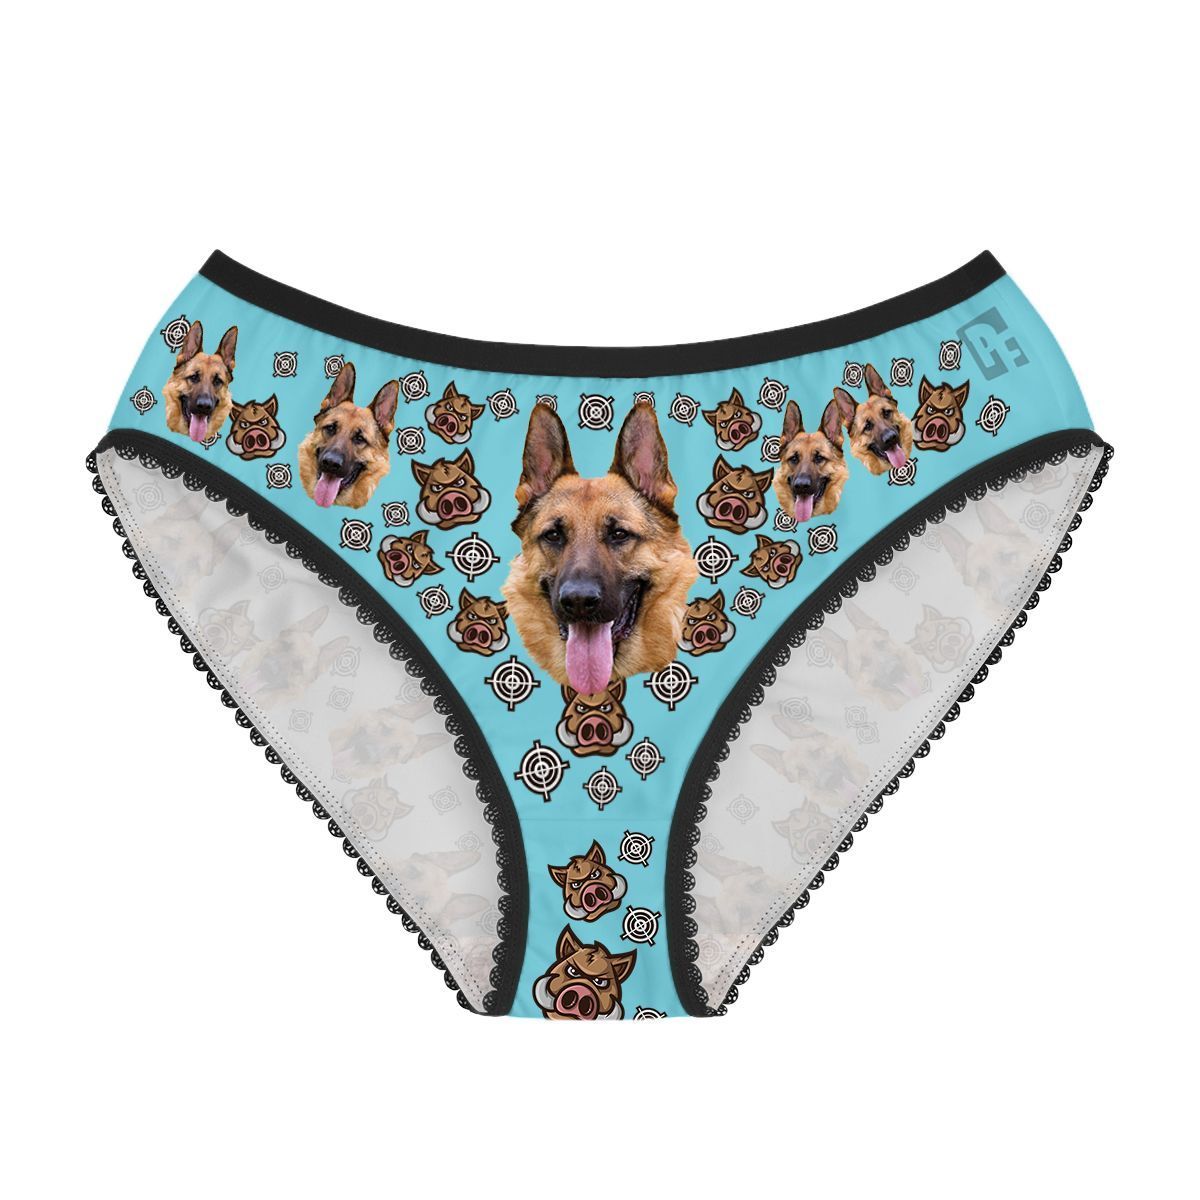 Blue Boar Hunter women's underwear briefs personalized with photo printed on them